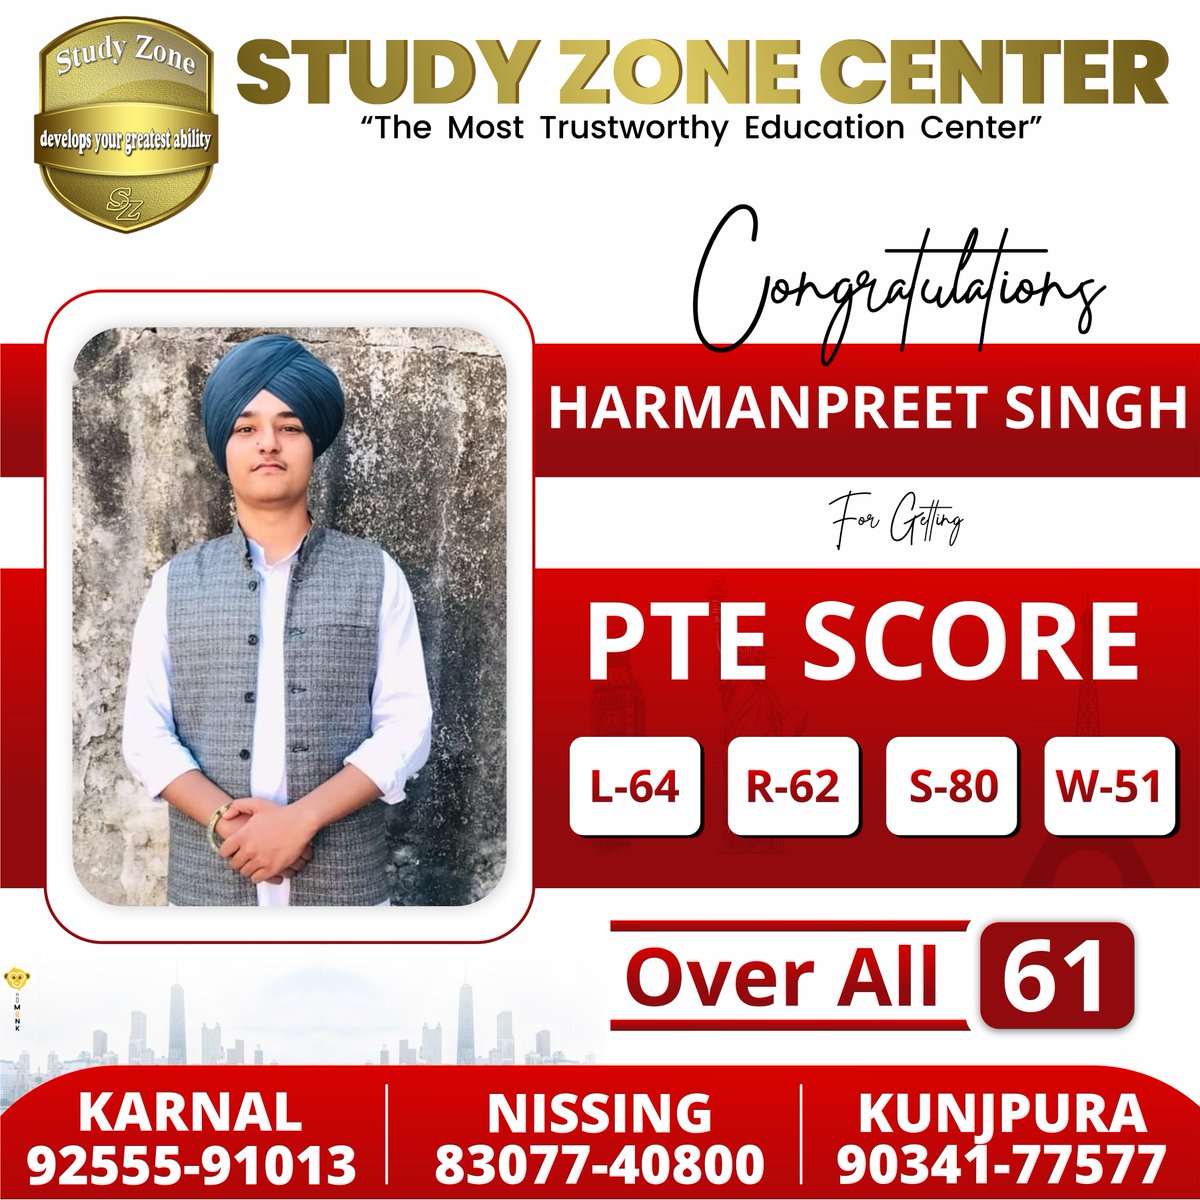 Congratulations Harmanpreet for getting Overall 61 Score in PTE
.
Call Us 📲 :
Head Office Karnal : 92555-91013
Kunjpura Branch : 90341-77577
Nissing Branch : 83077-40800
. 
.
#STUDYZONE #JoinNow #studyzonecenter #PTE #pteclasses #ptestrategies #listening #PTE #ptescore